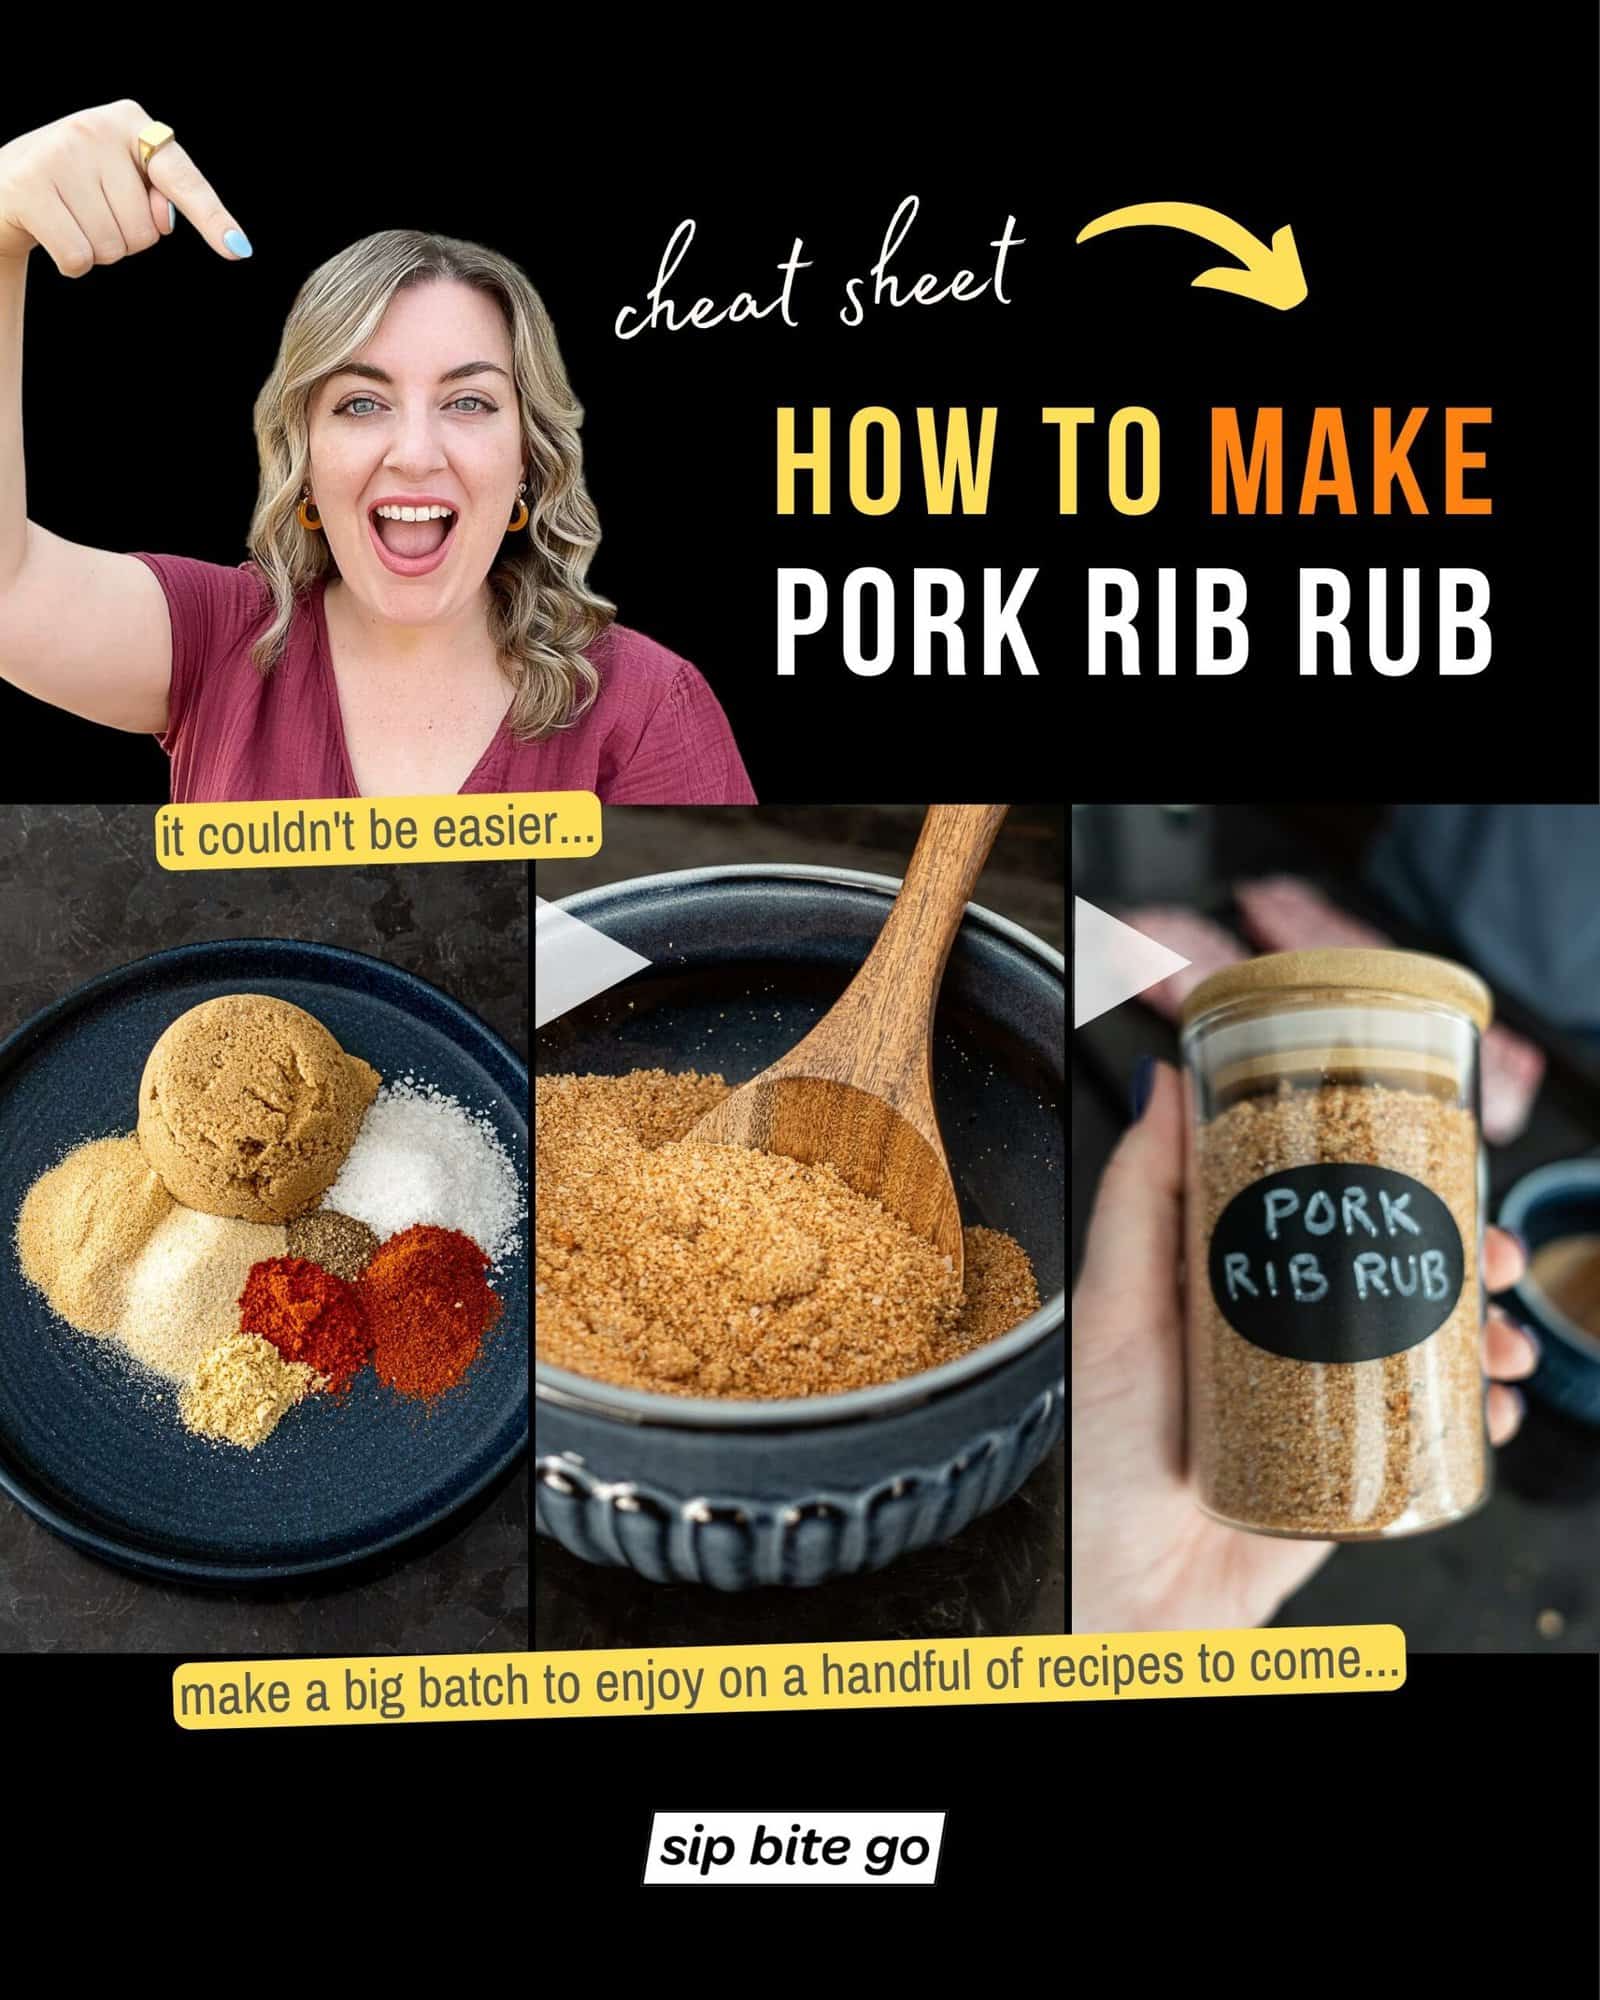 Infographic demonstrating recipe on how to make pork rib rub from scratch spices with Jenna Passaro and Sip Bite Go logo